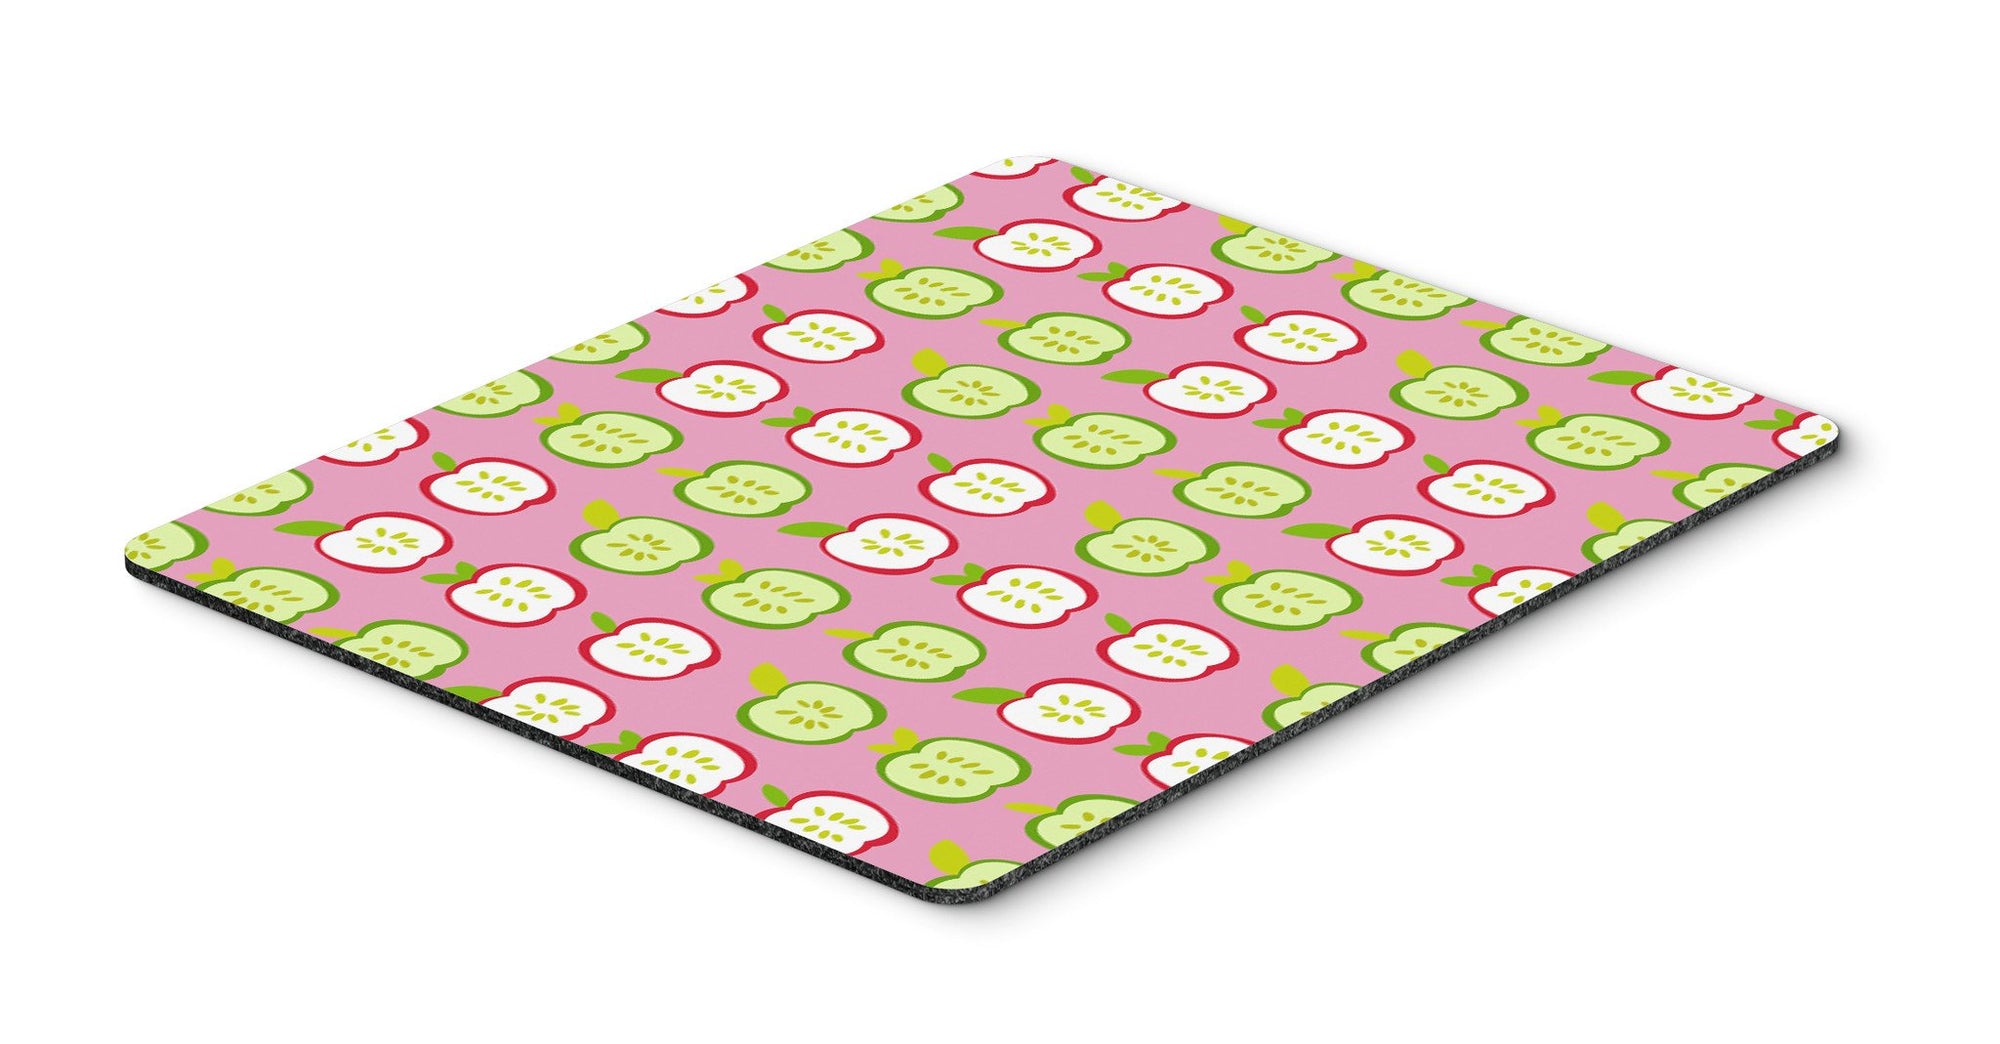 Apples on Pink Mouse Pad, Hot Pad or Trivet BB5141MP by Caroline's Treasures